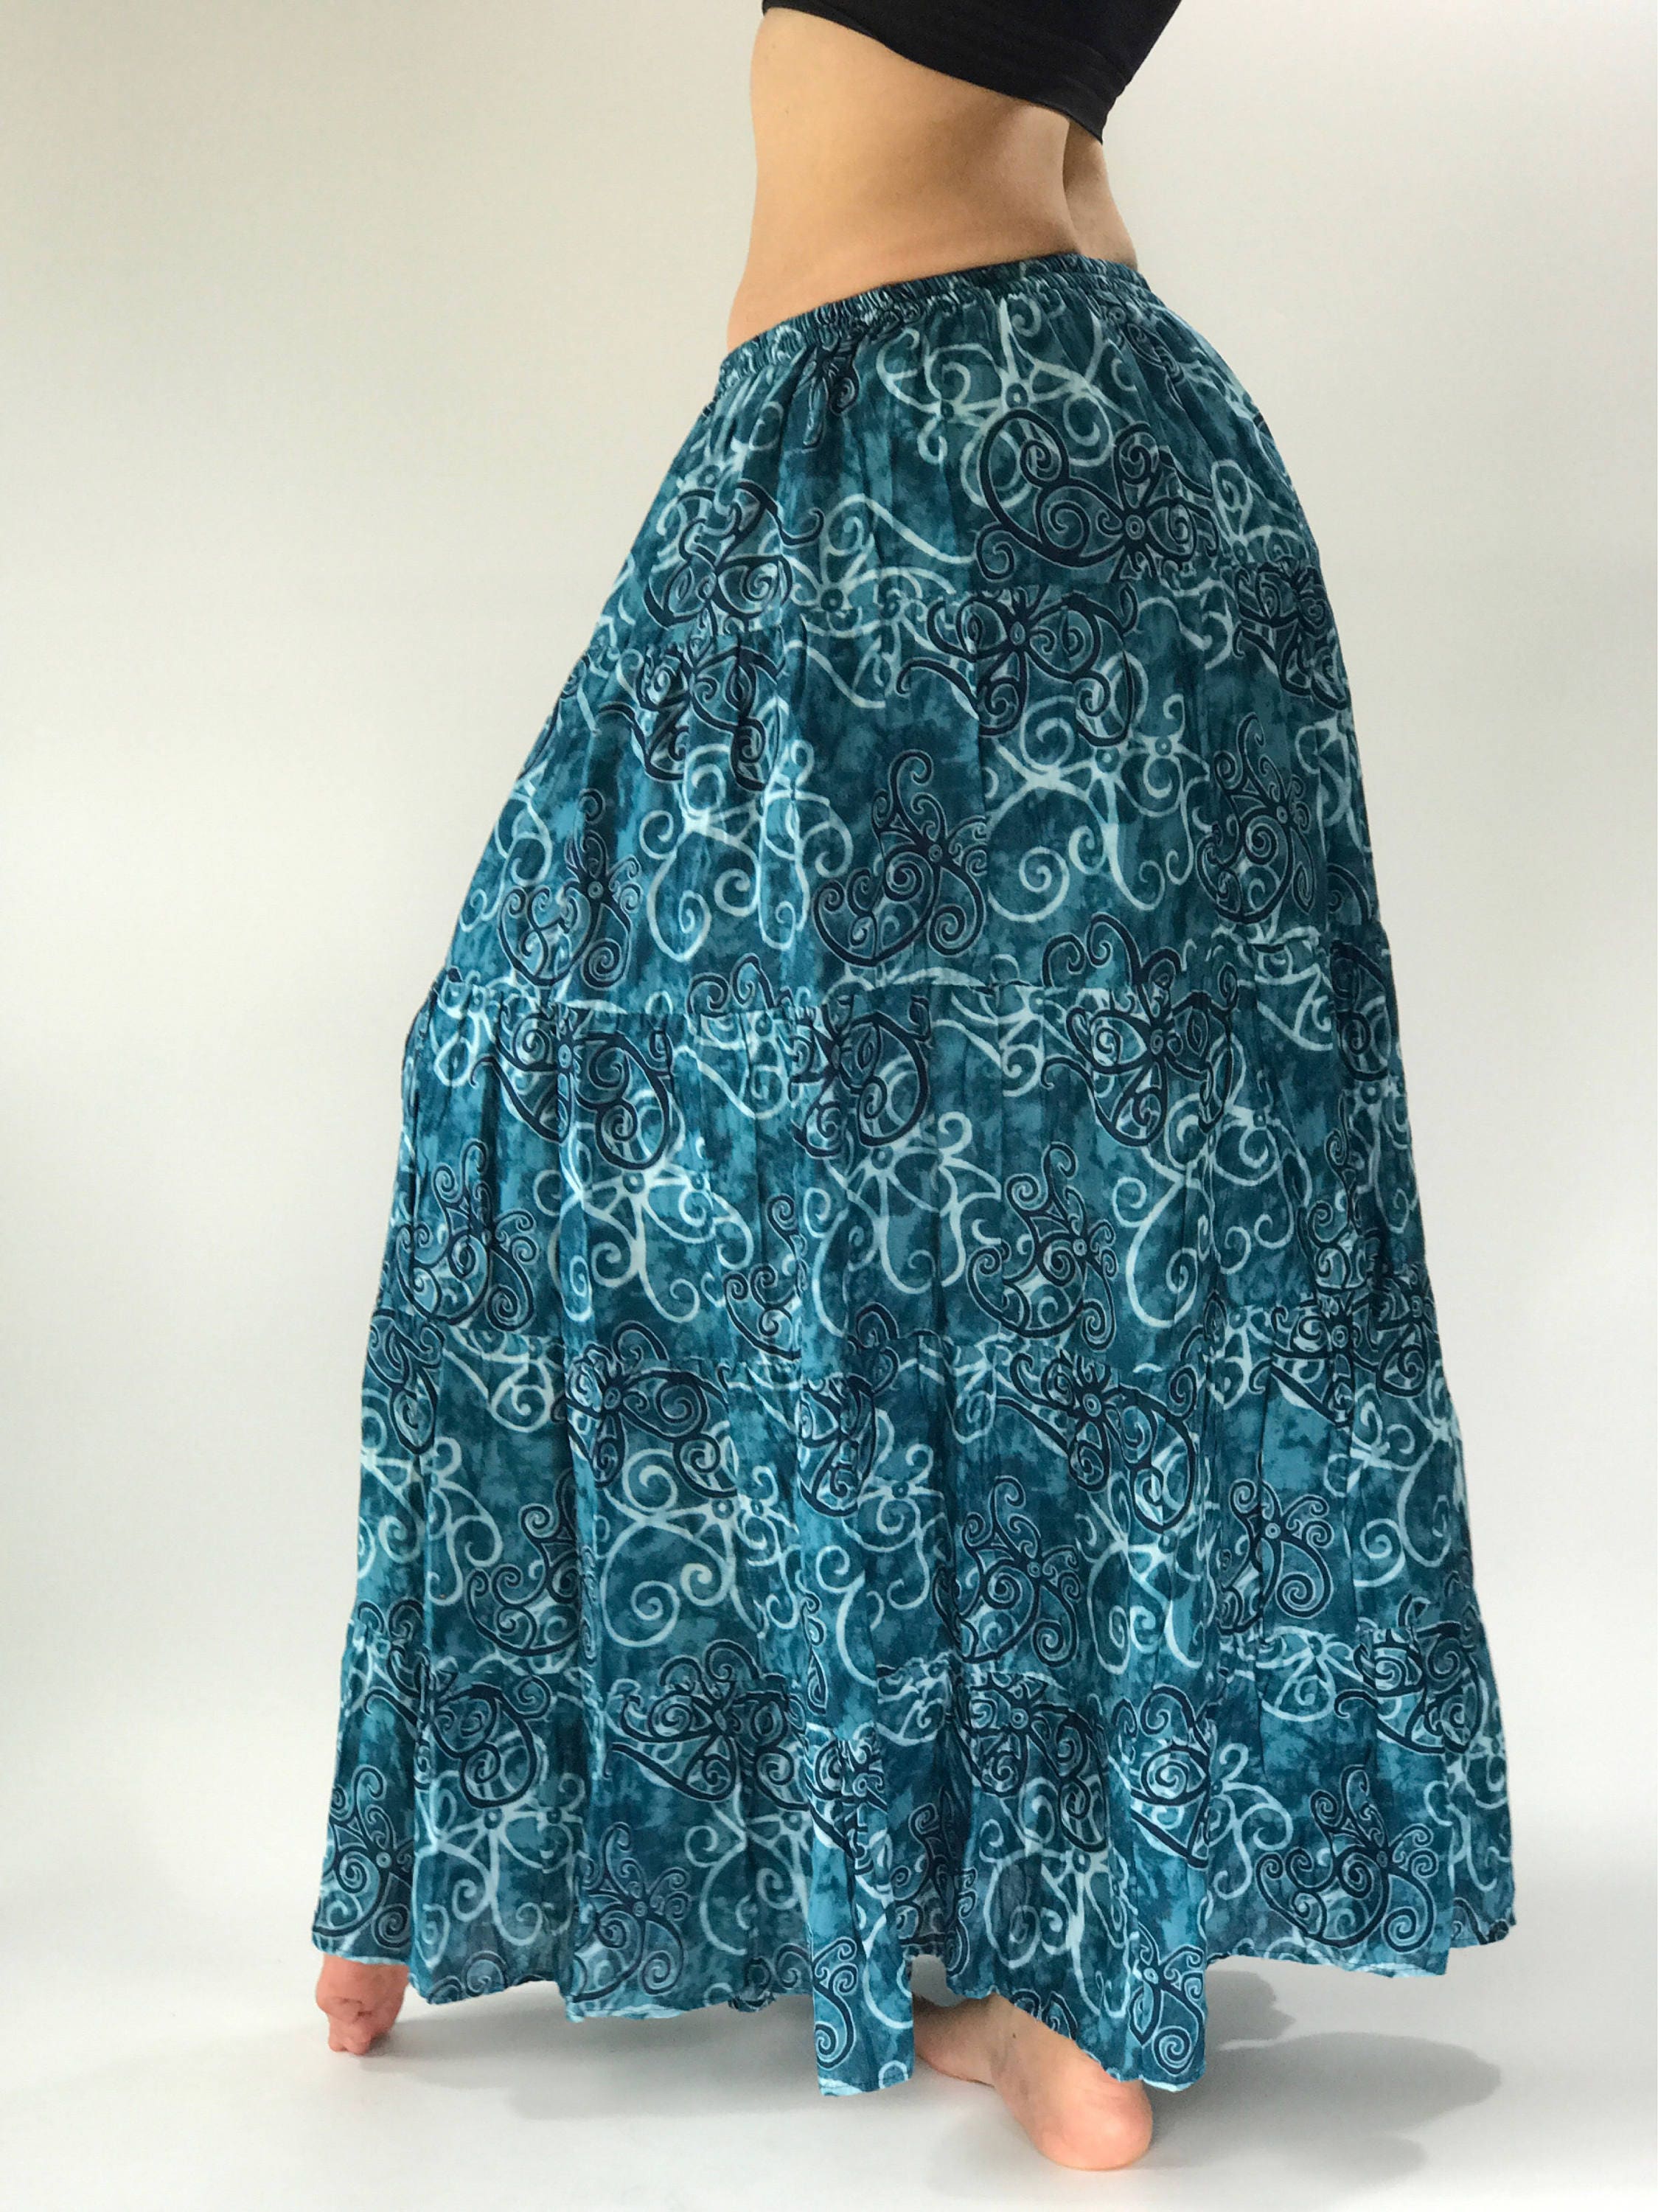 SK0007 Handmade Maxi Skirt for Beach Summer One size fit all